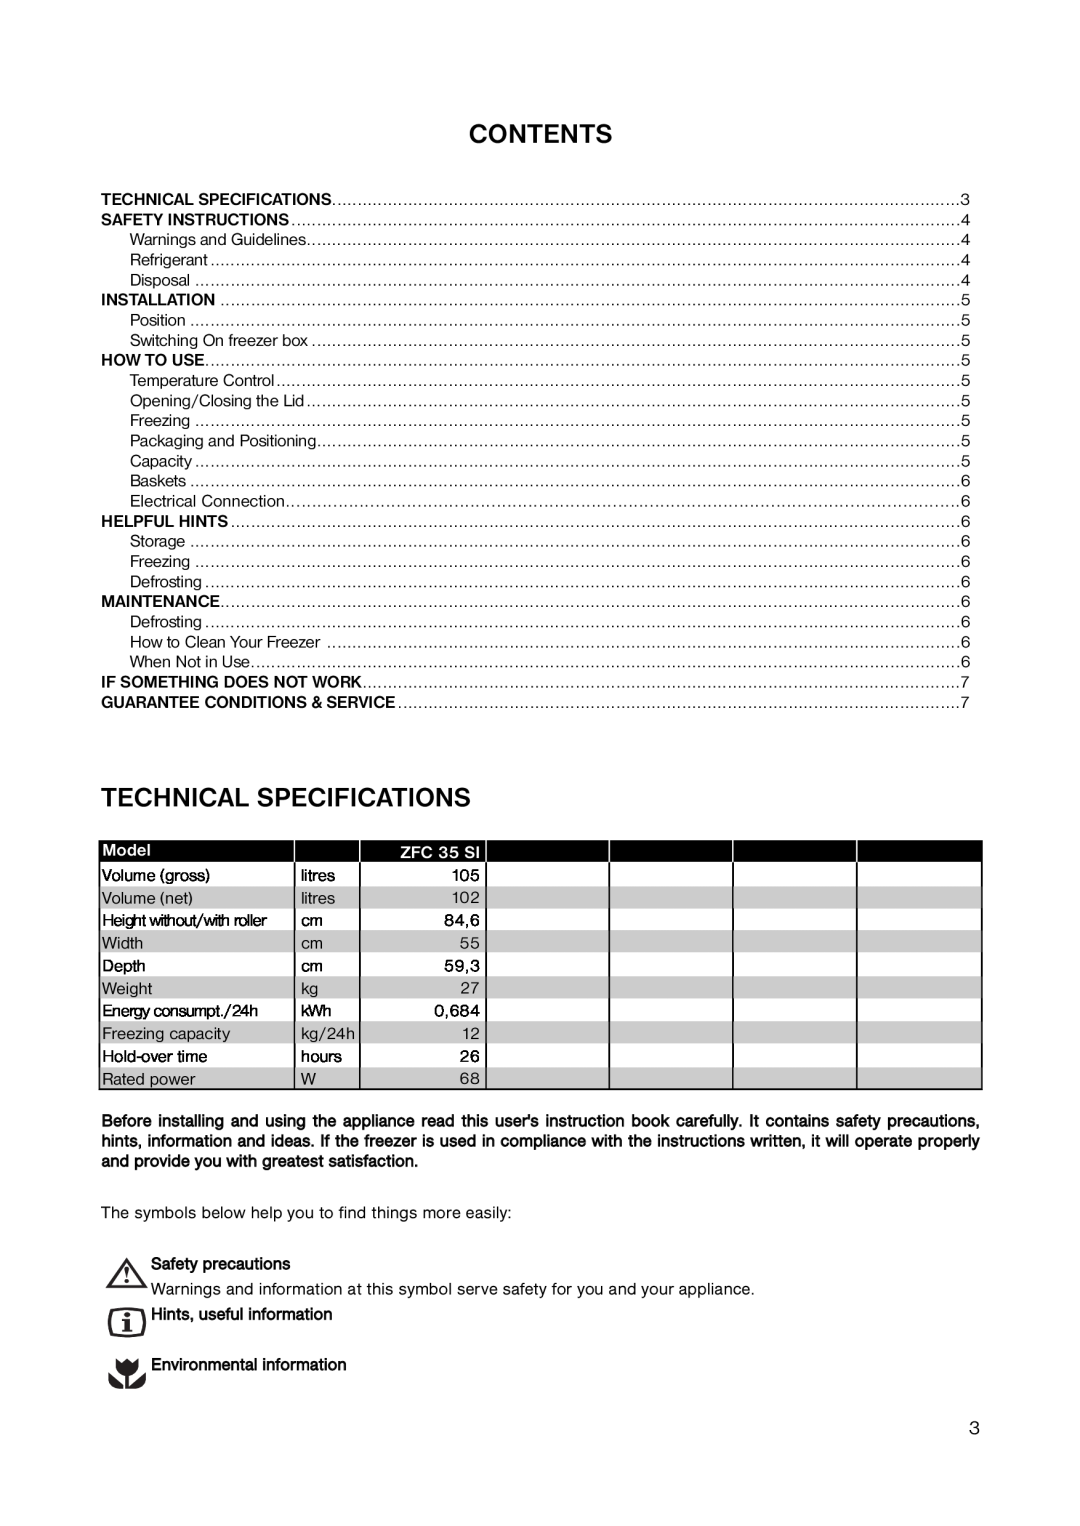 Zanussi ZFC 35 SI installation manual Technical Specifications, Model, Contents 